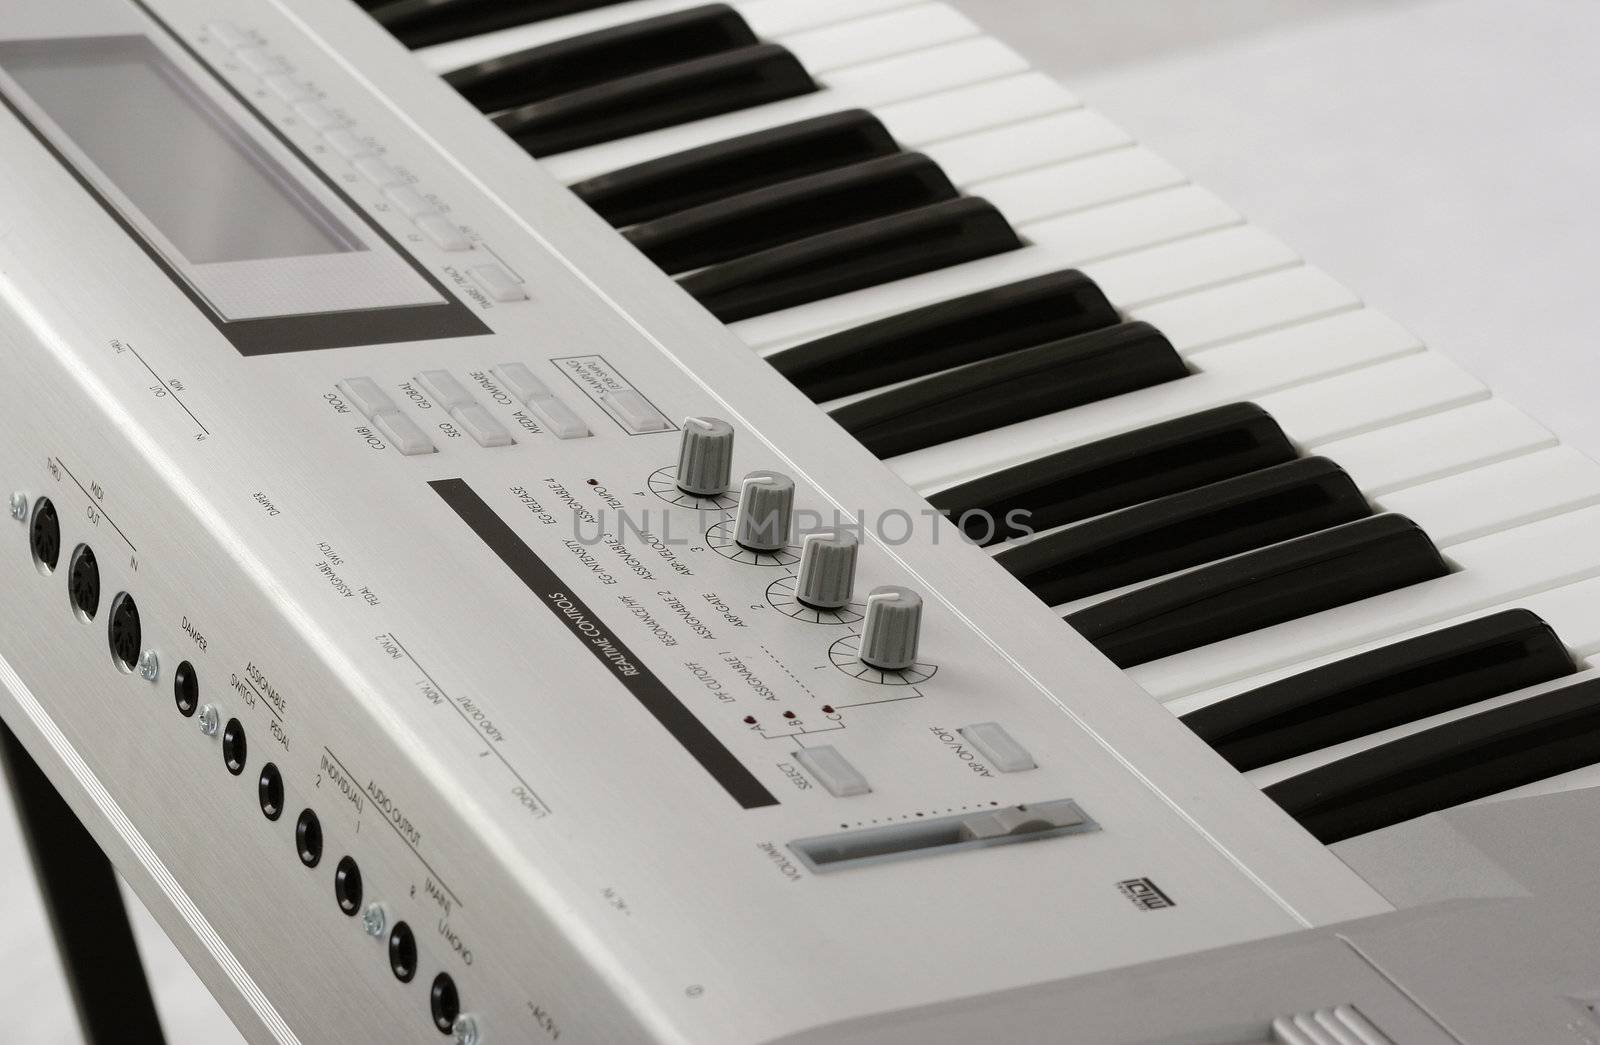 Musical instrument - a synthesizer Korg